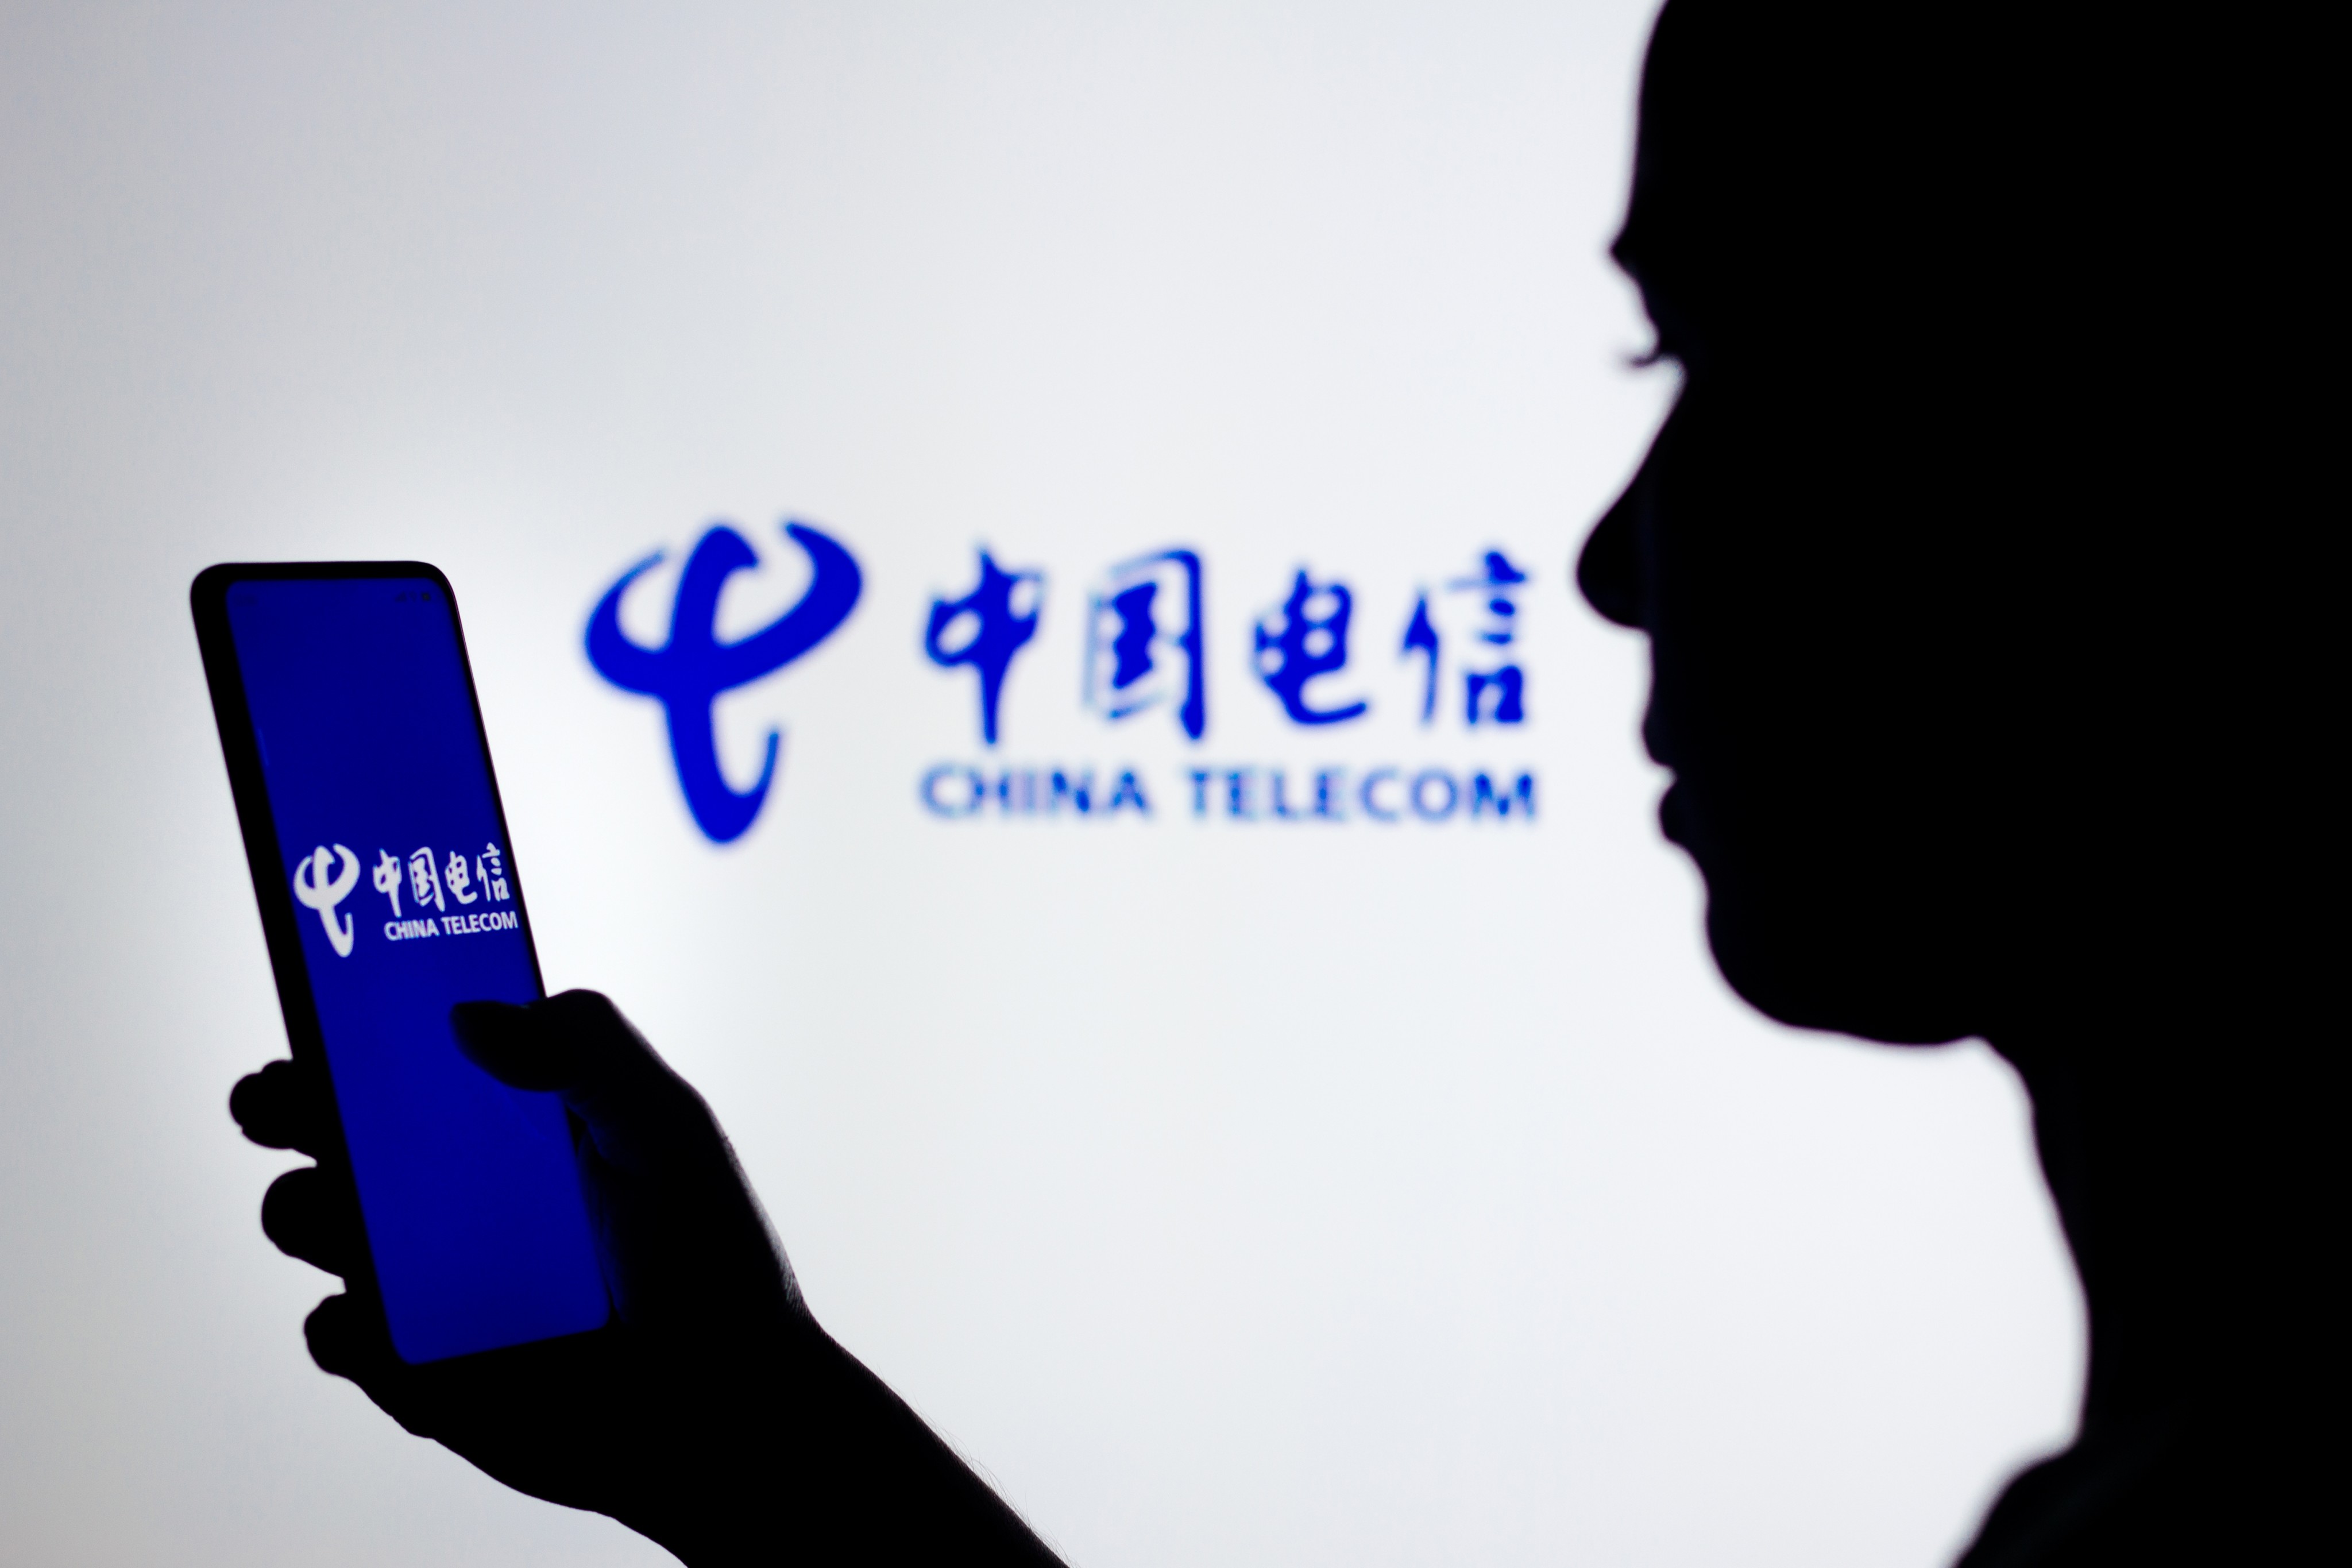 China Telecom, China’s third-largest cloud service provider, is joining the generative AI race with plans to soon launch a product based on its self-developed large language models. Photo: Shutterstock